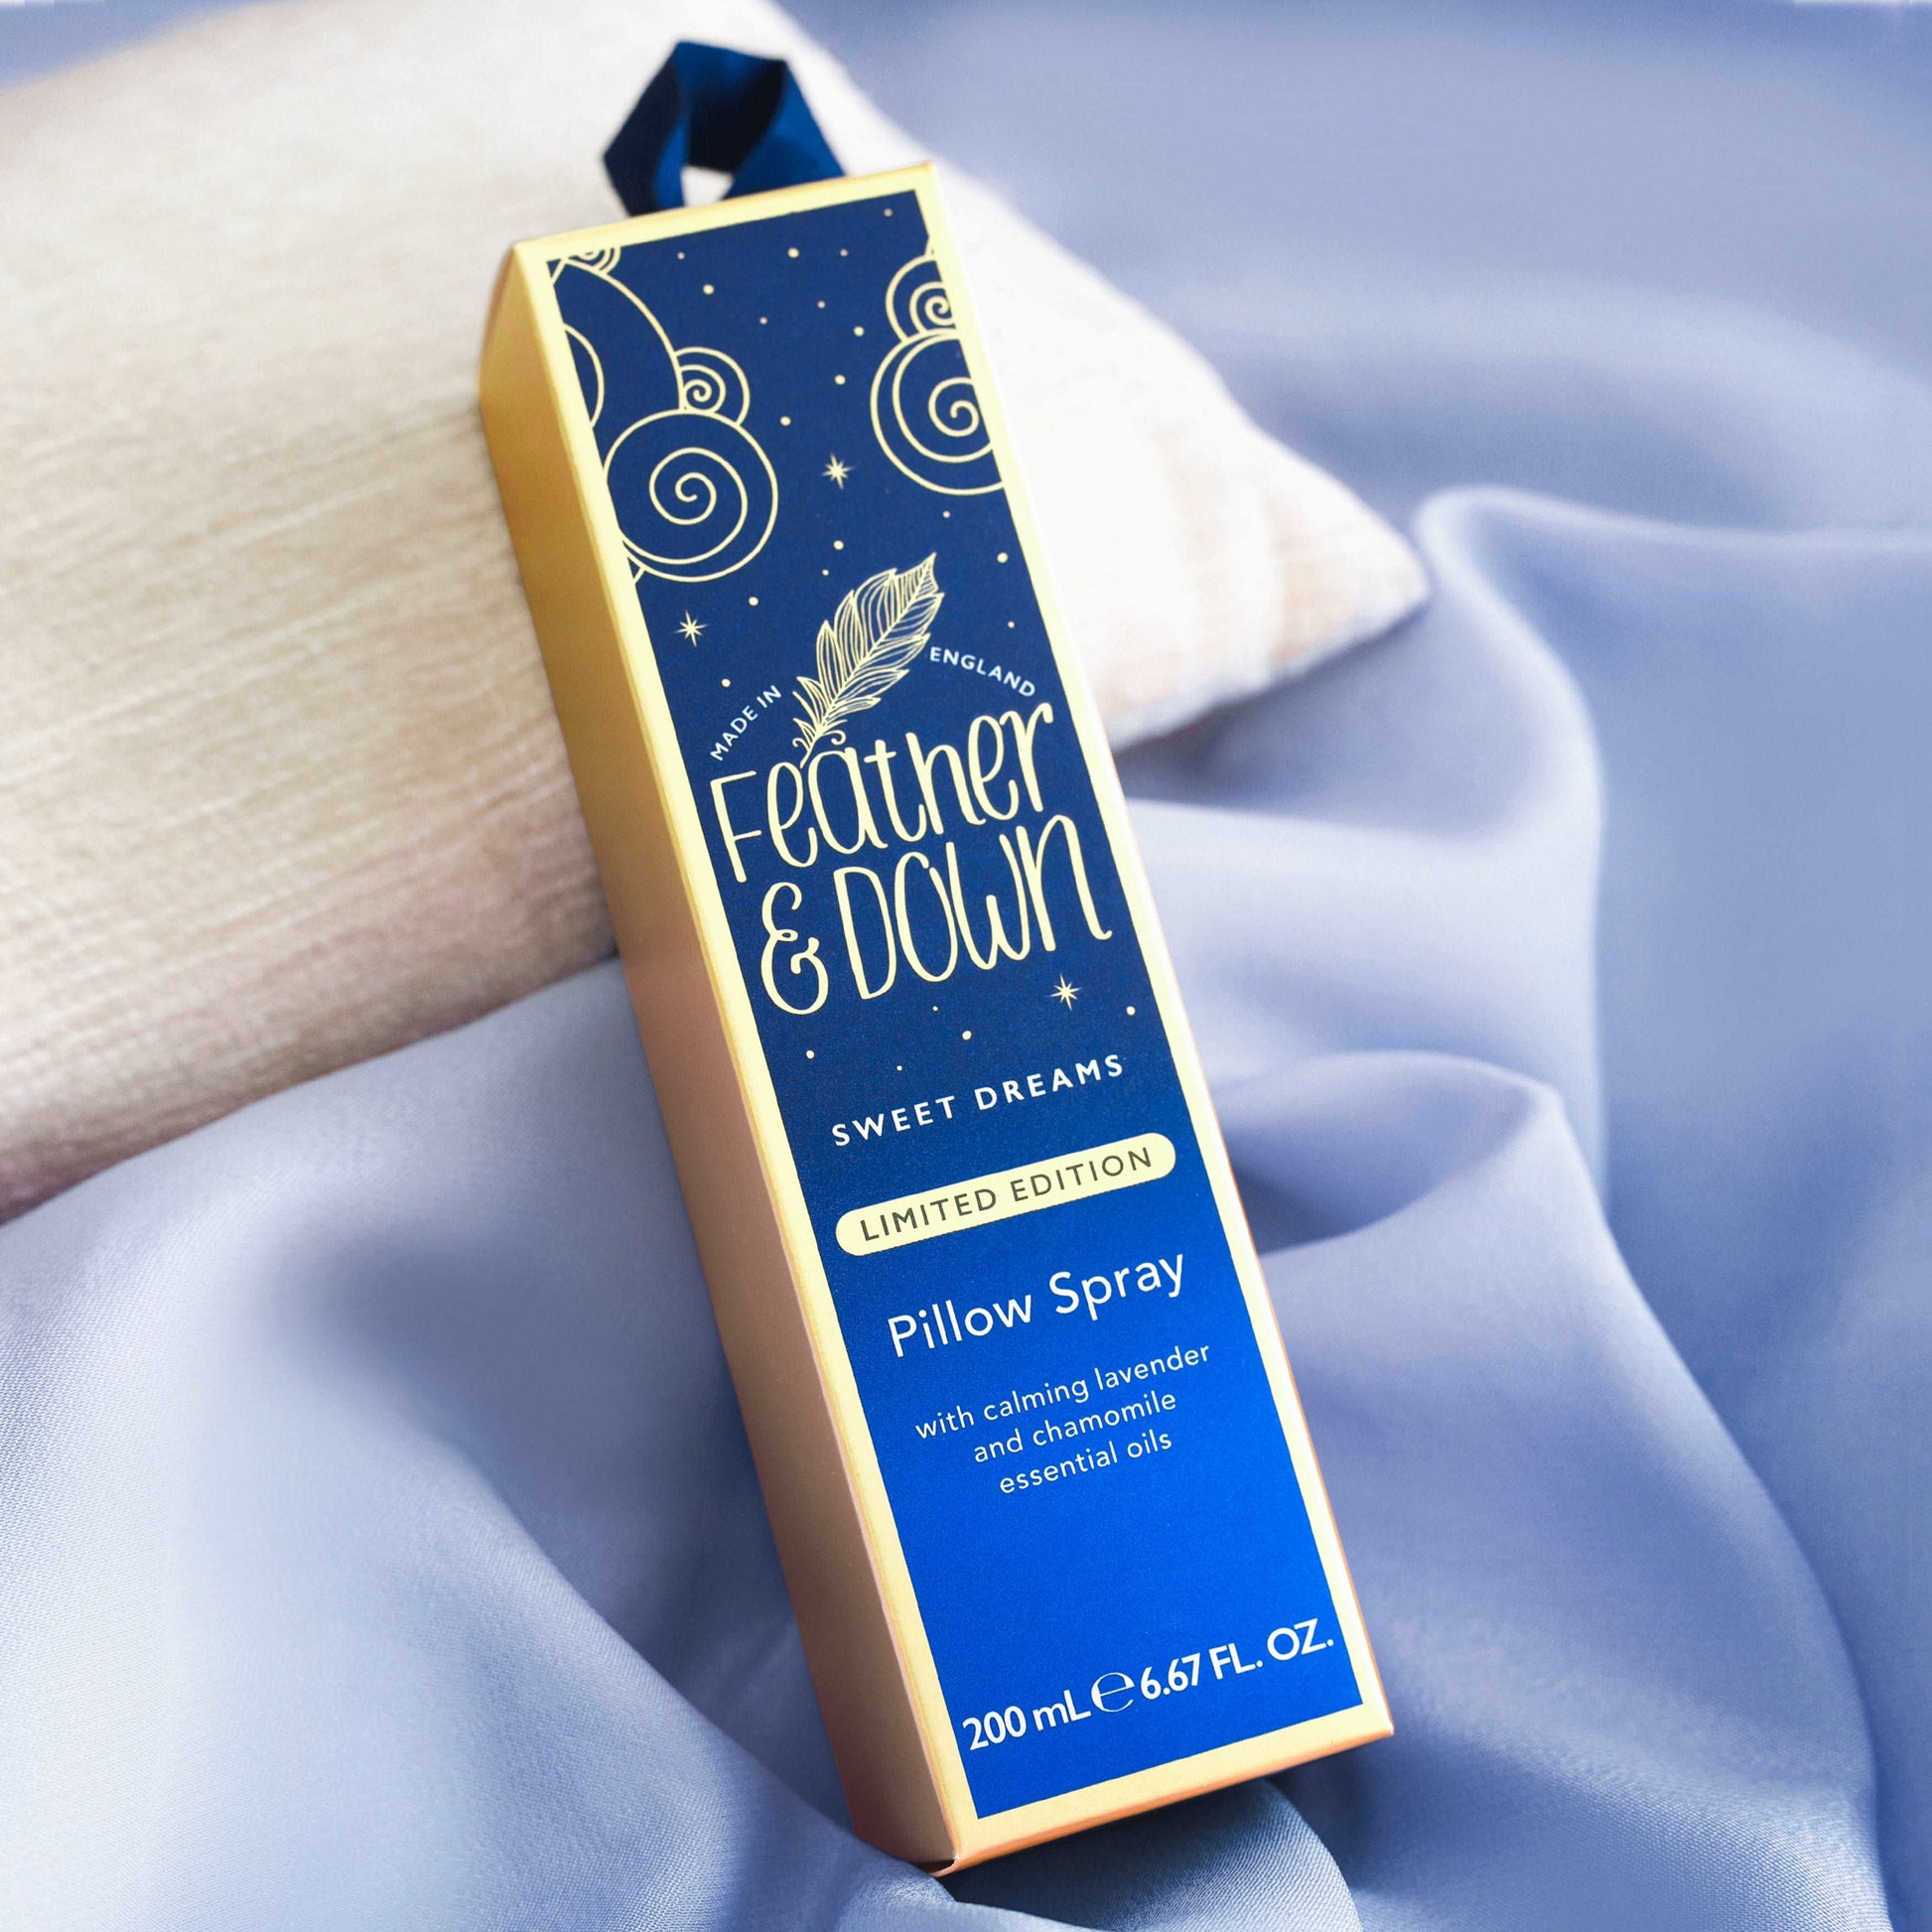 Sweet Dreams Pillow Spray - 200ml - Feather and Down 